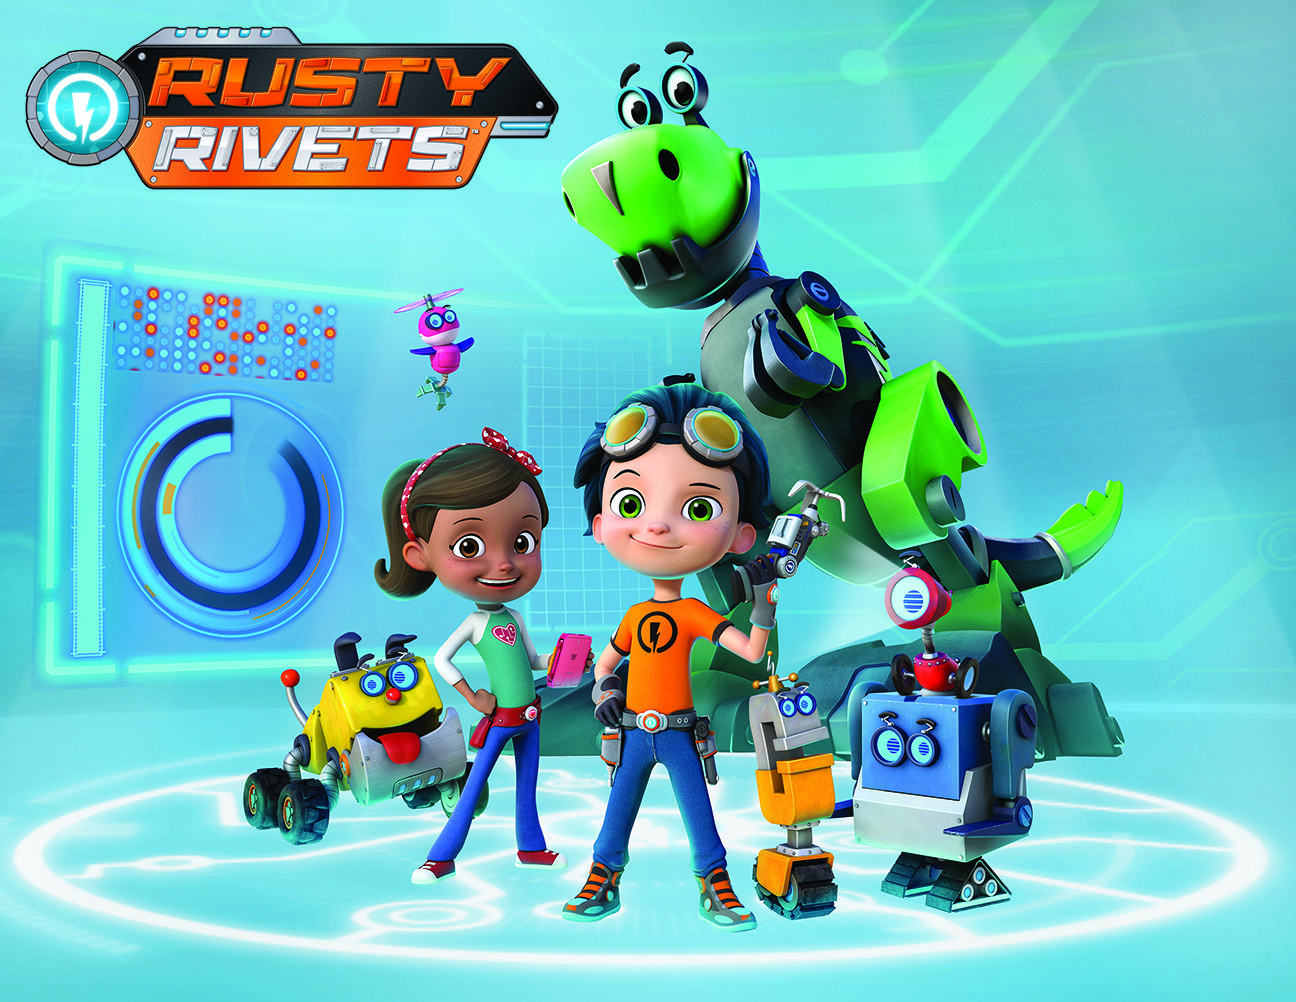 NickALive!: Nickelodeon Junior France Premieres 'Rusty Rivets' On Monday 8th January 2018